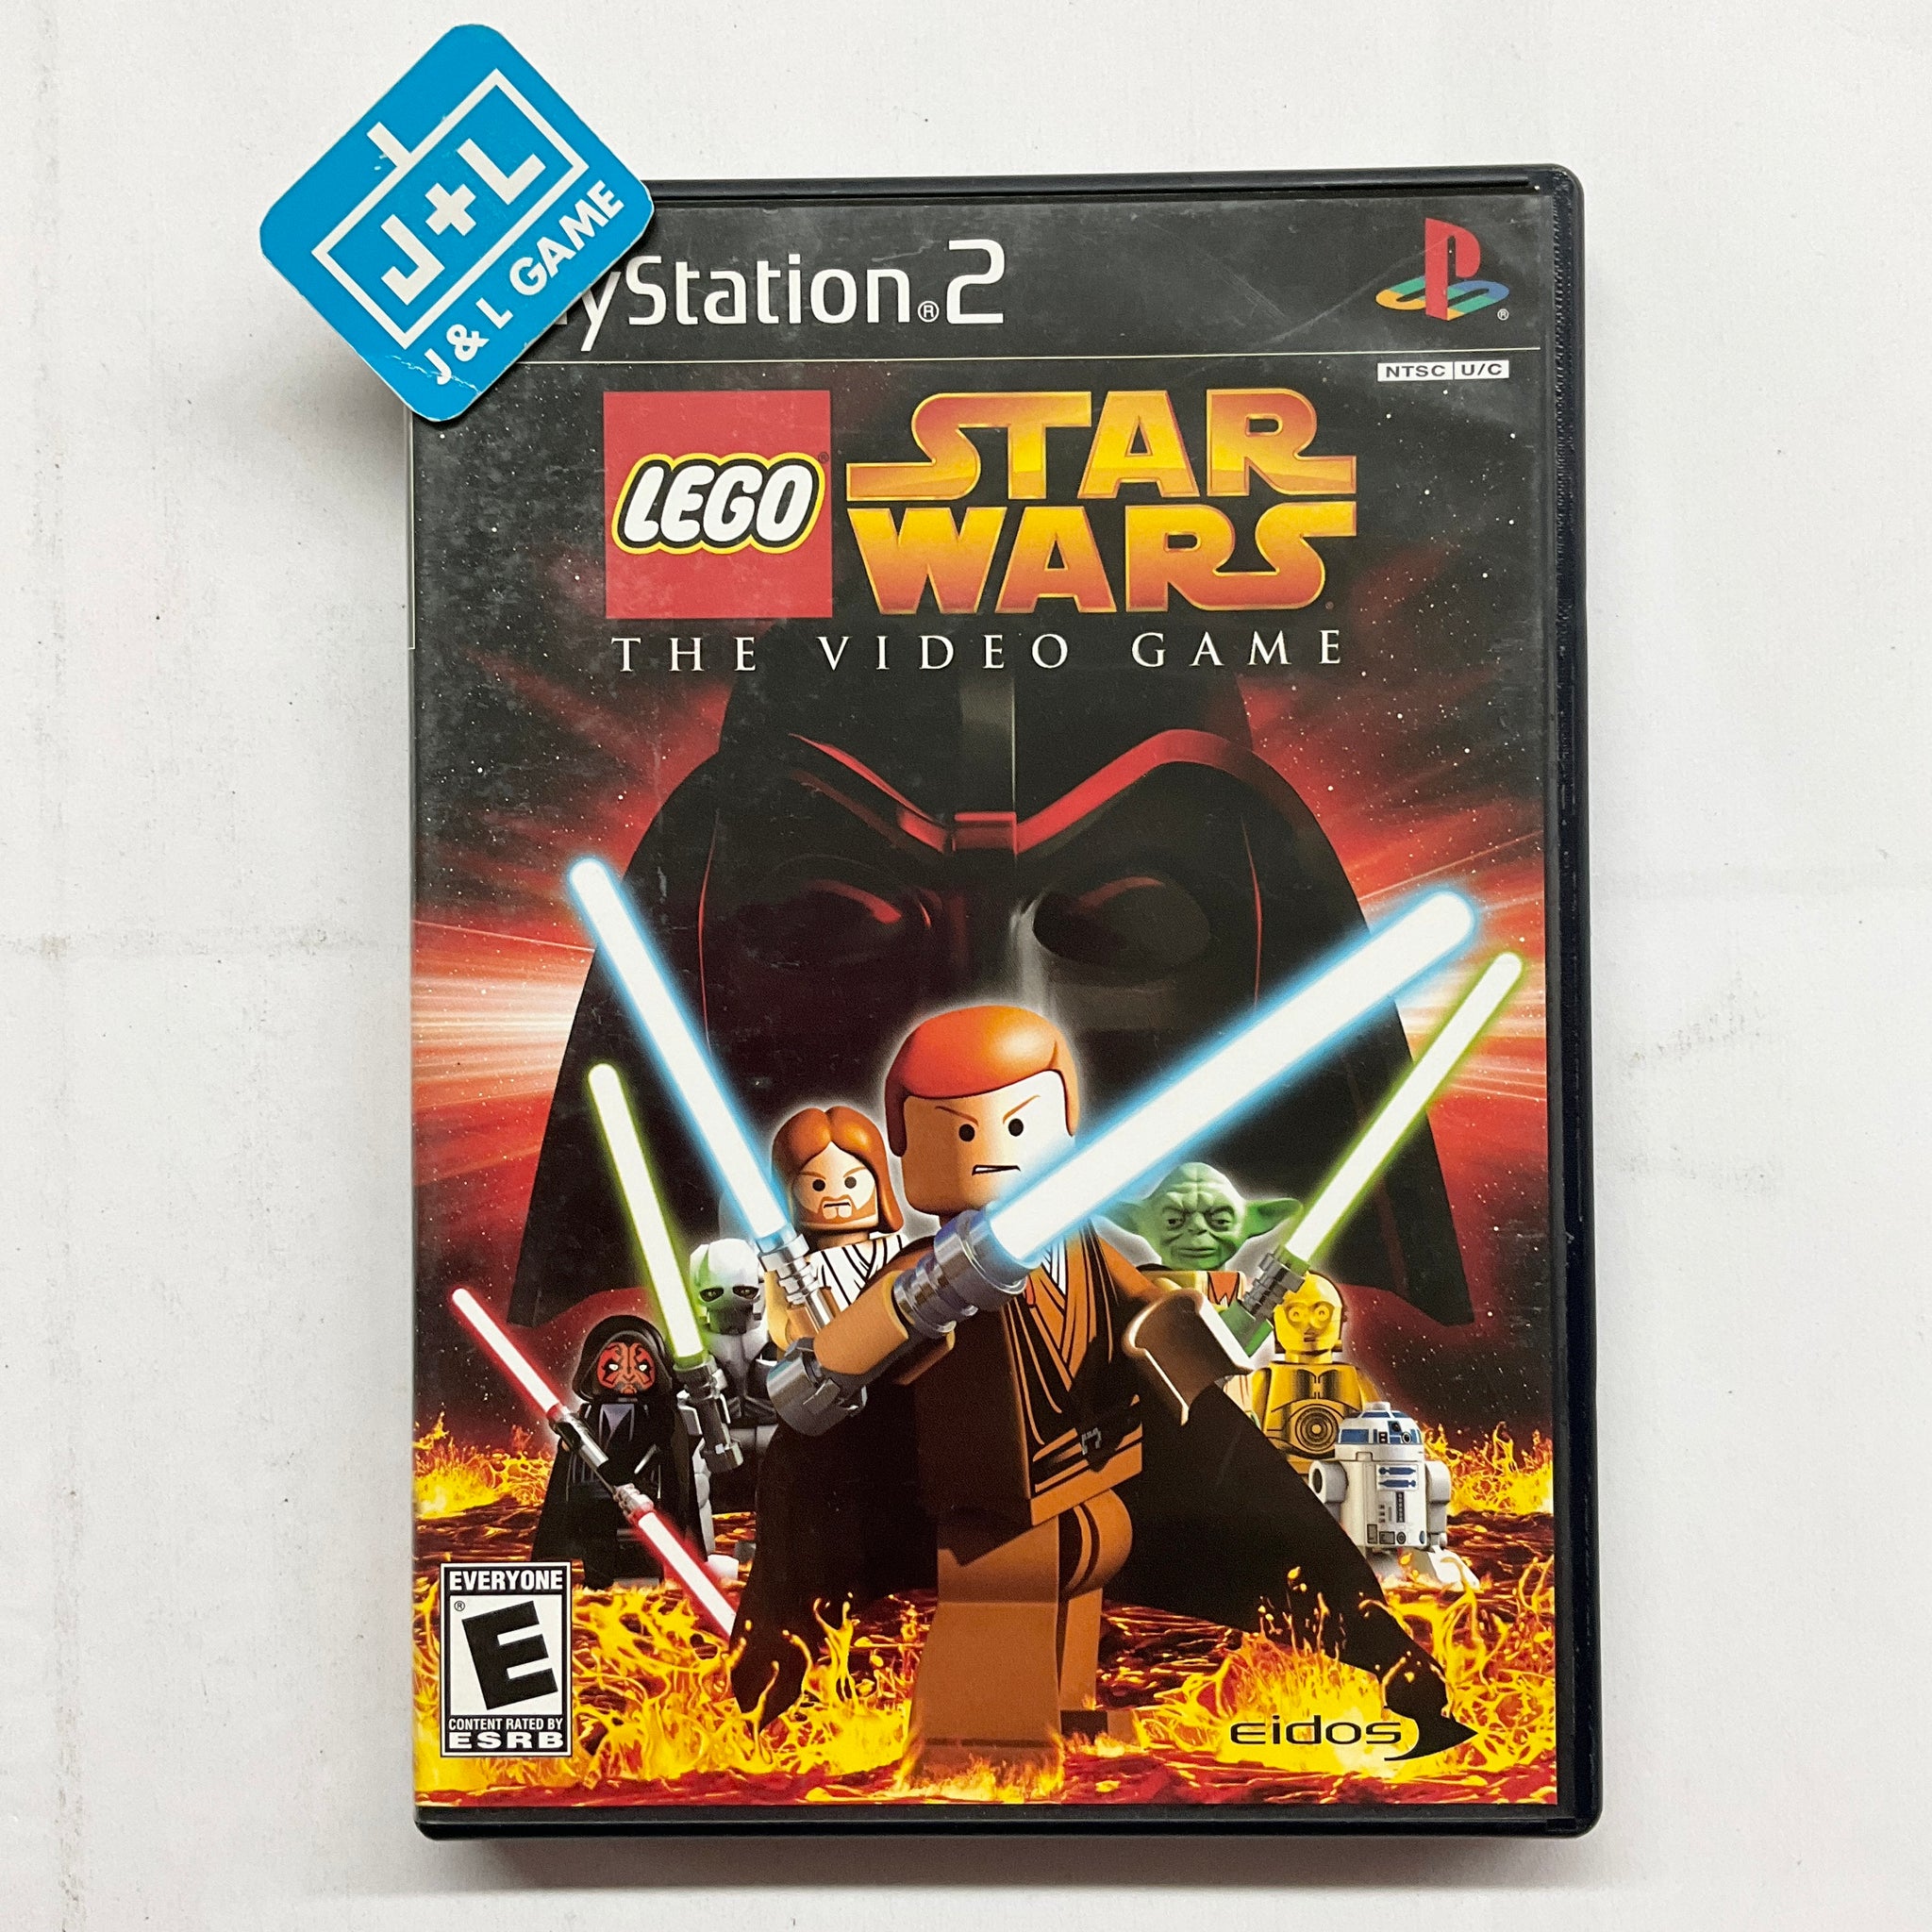 Star Wars Games for PS2 